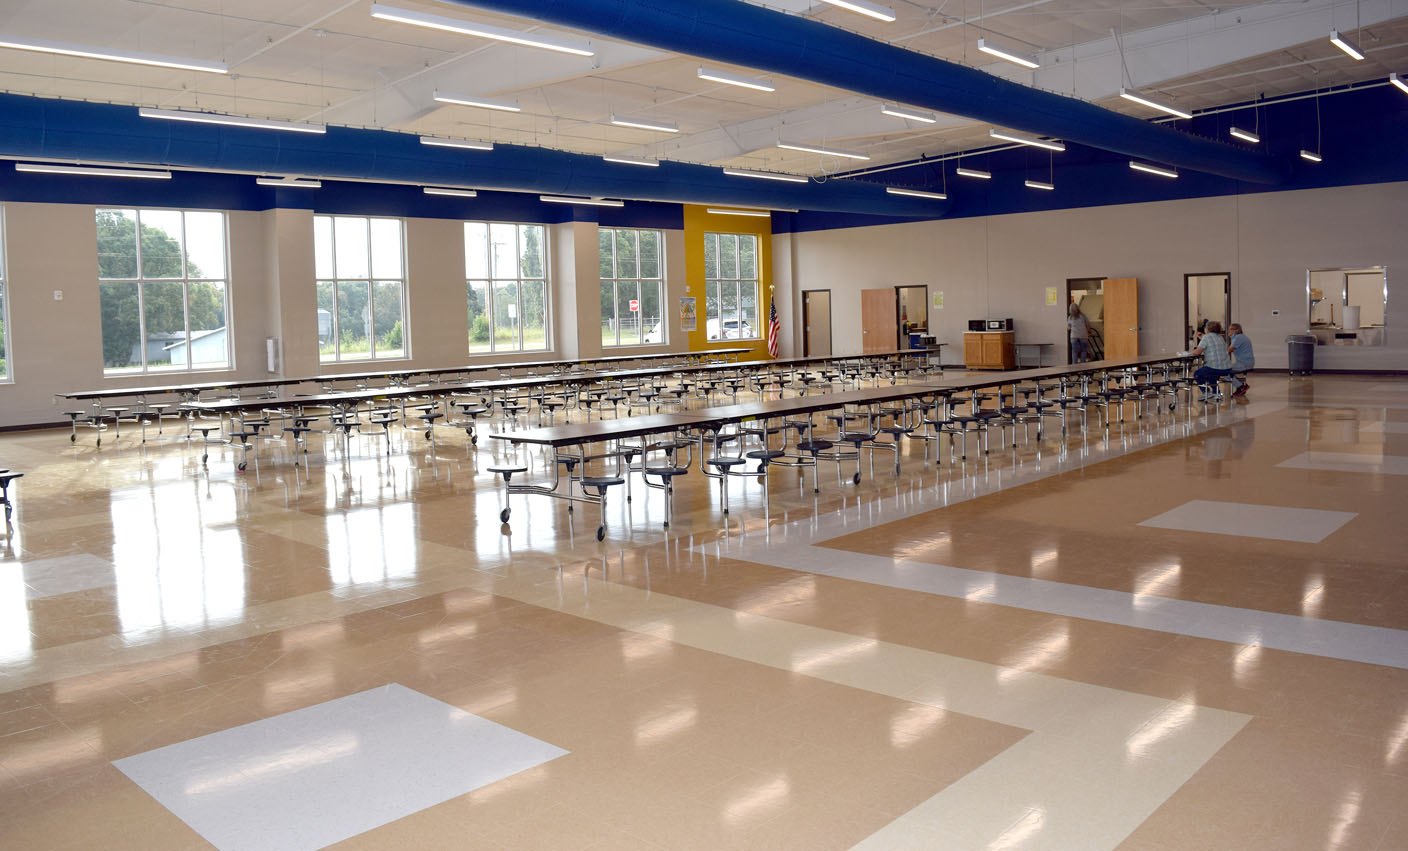 High school cafeteria used for first time